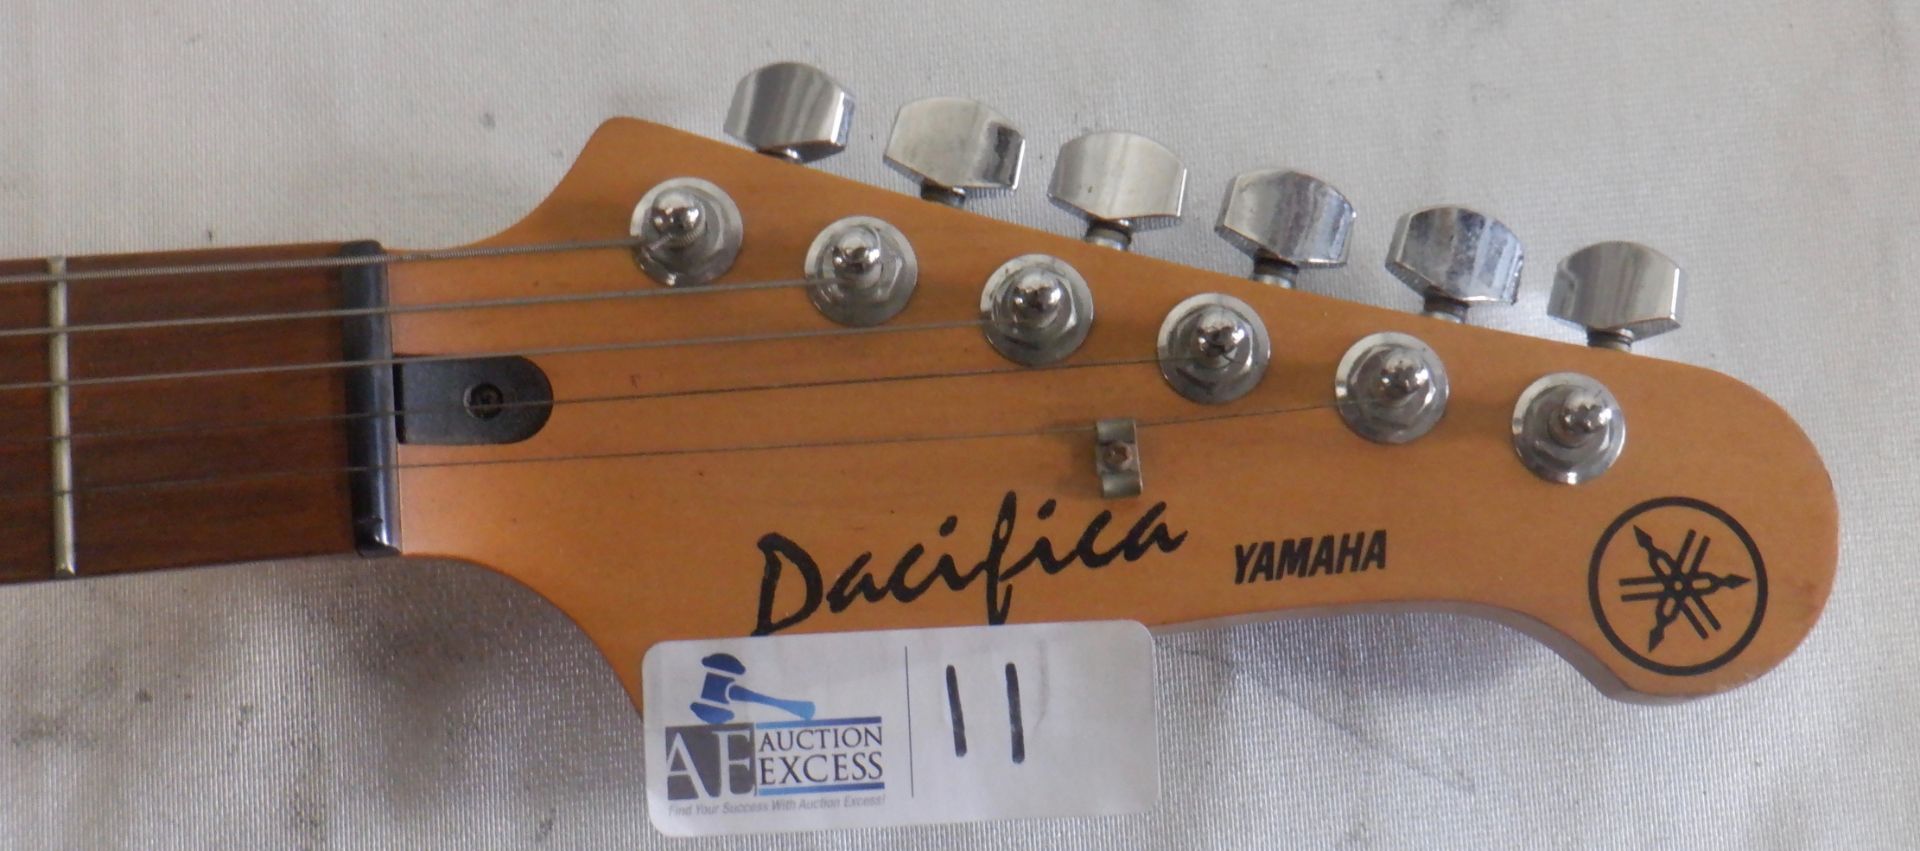 YAMAHA PACIFICA GUITAR WITH CASE - Image 4 of 6